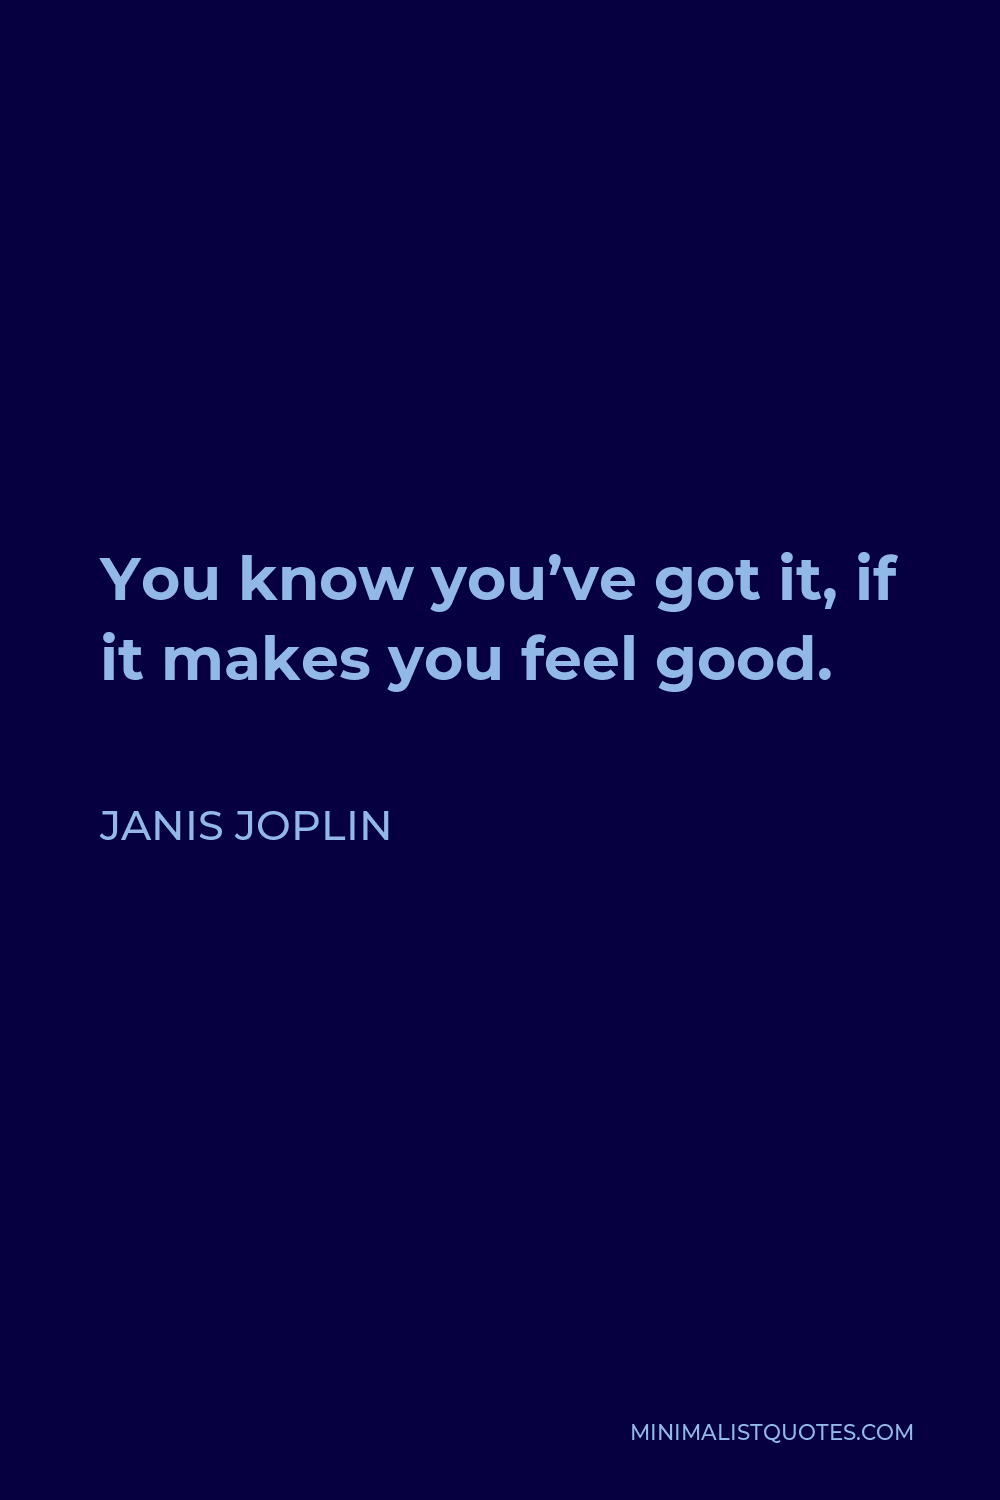 Janis Joplin Quote - You know you’ve got it, if it makes you feel good.